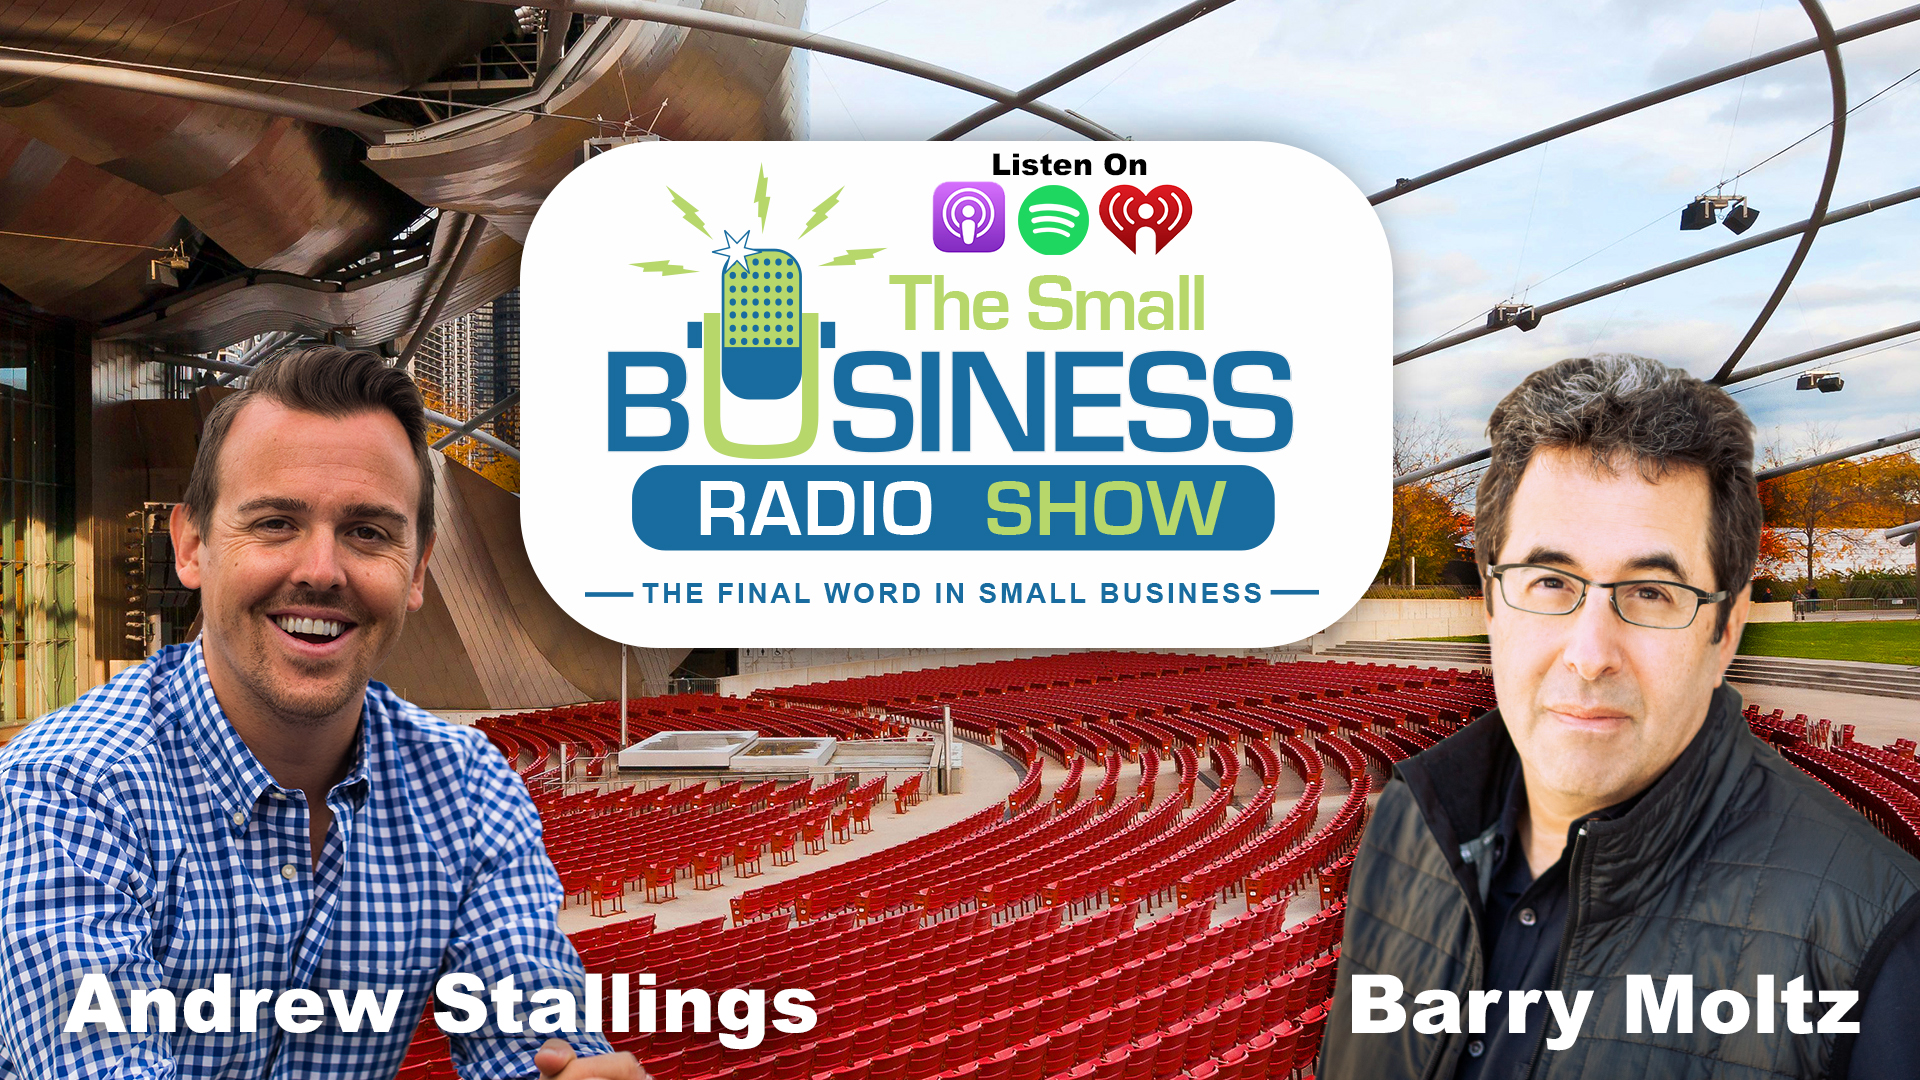 Andrew Stallings on The Small Business Radio Show